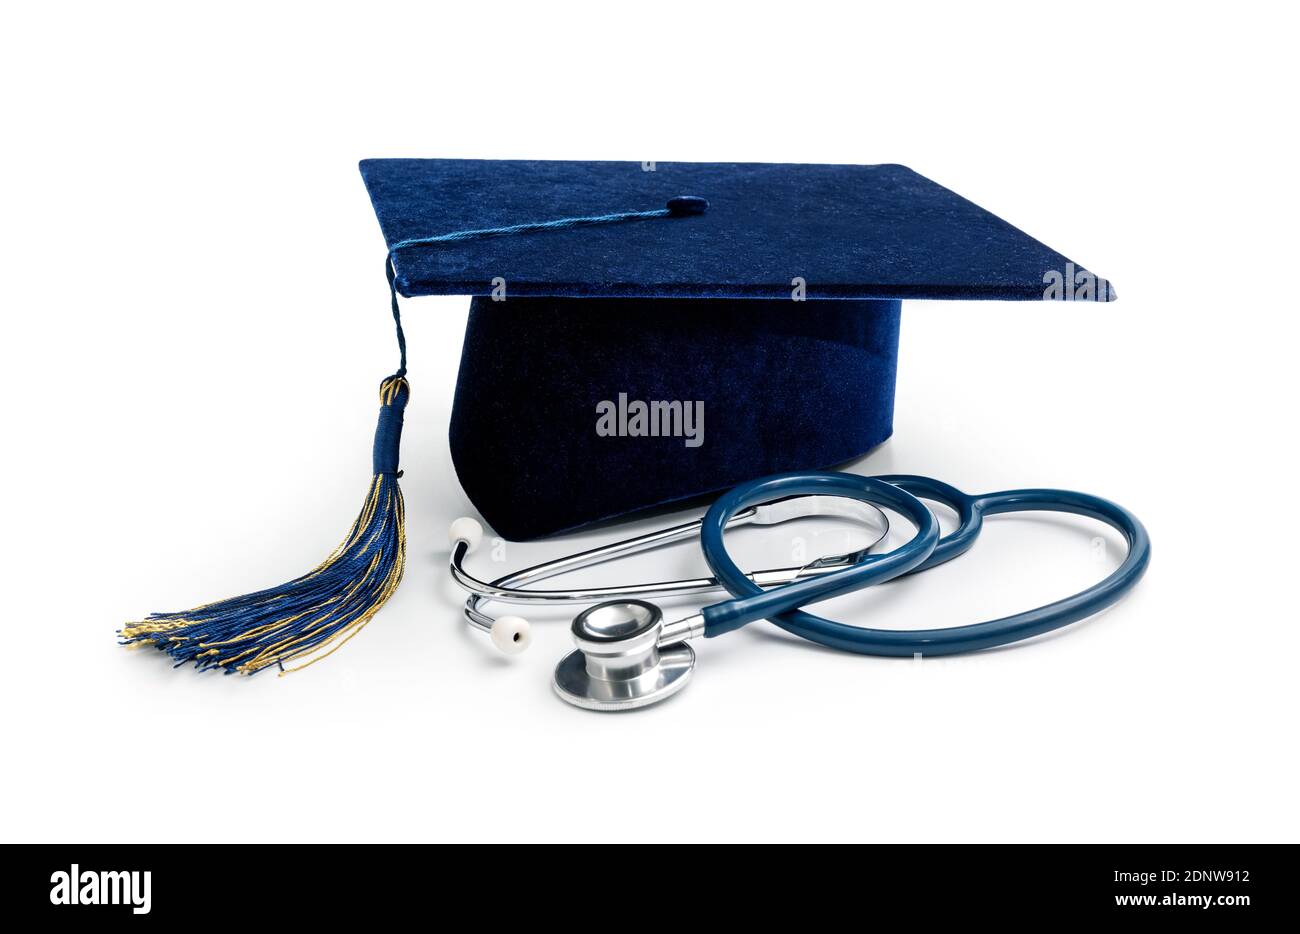 medical education - college graduation cap and stethoscope isolated on white background Stock Photo